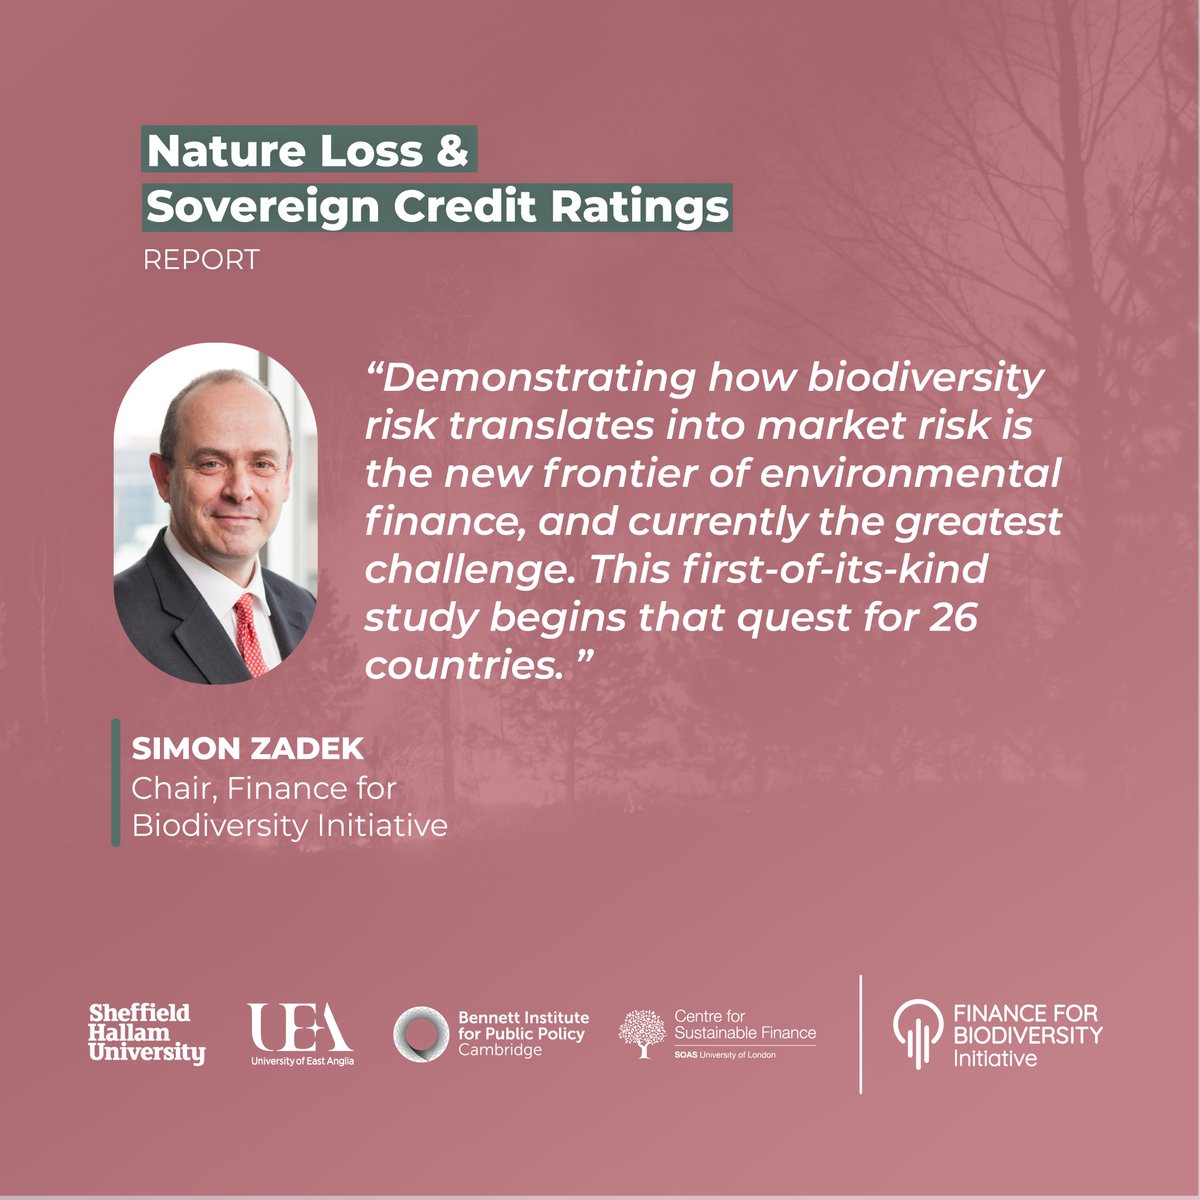 World's first #biodiversity-adjusted sovereign credit rating warns of looming national debt crisis across 26 countries.
#sovereigndebt #naturerisk #sustainableeconomy 